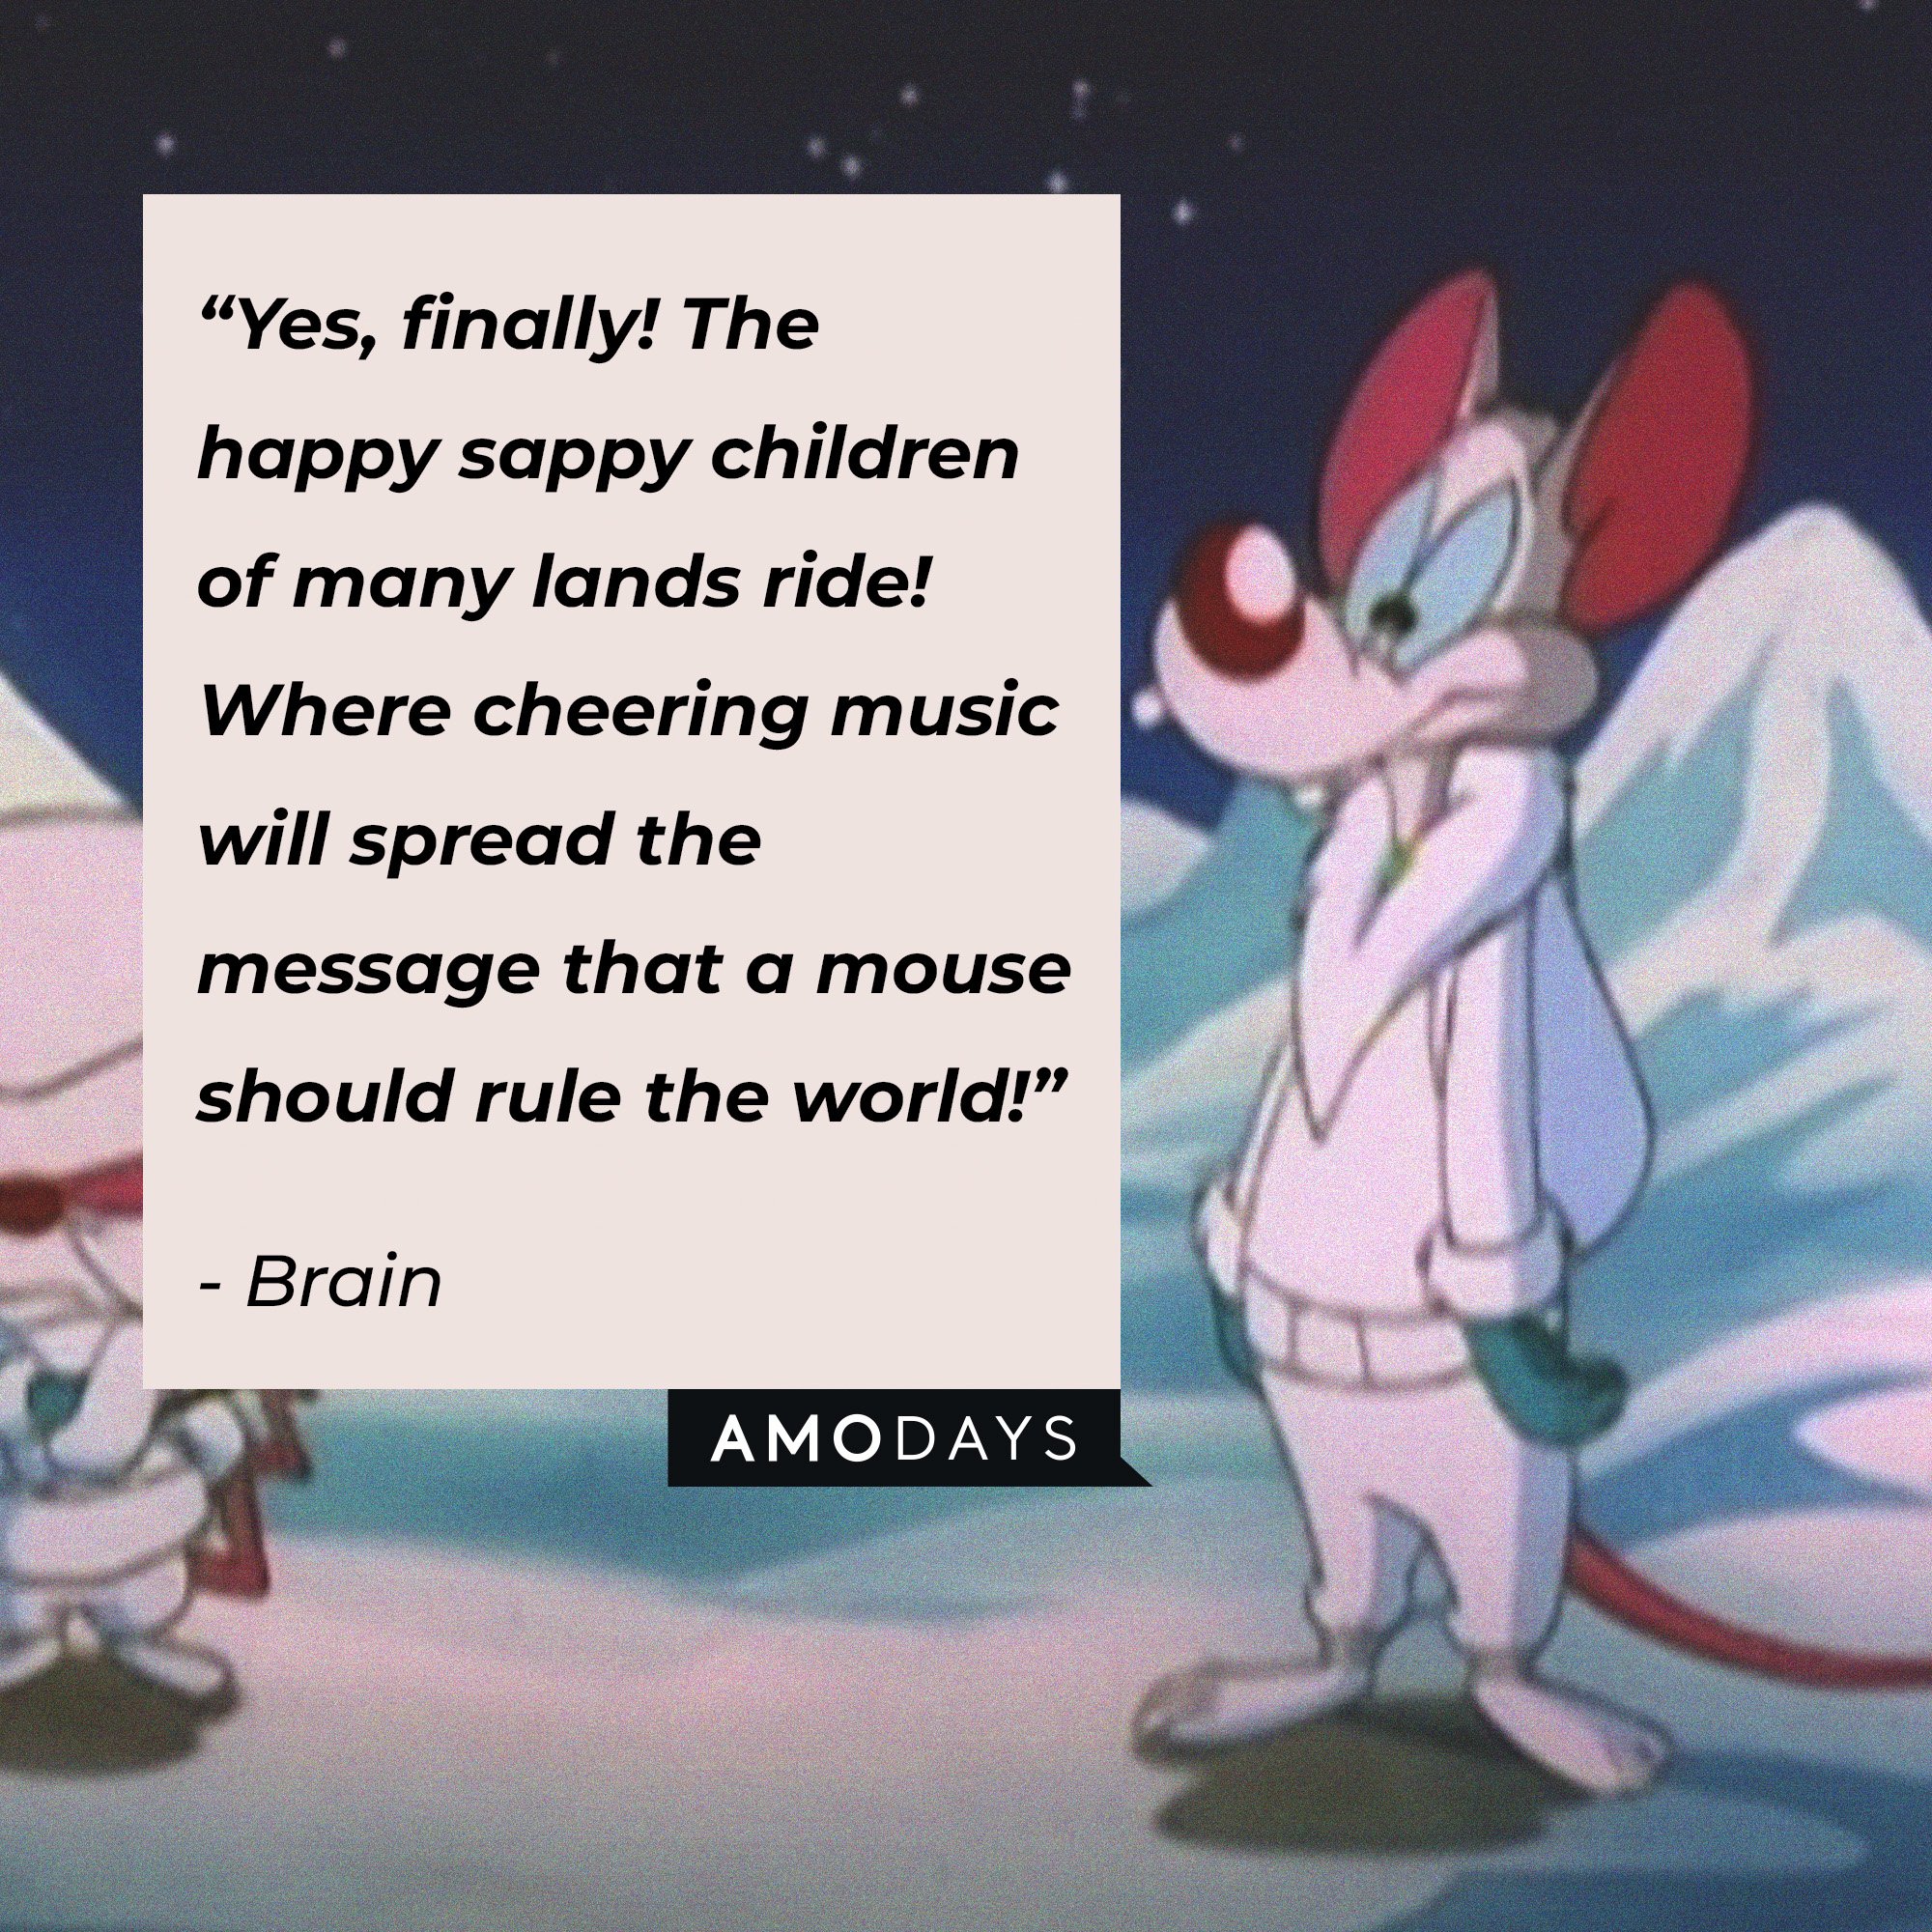 Brain's quote:  “Yes, finally! The happy sappy children of many lands ride! Where cheering music will spread the message that a mouse should rule the world!” | Image: AmoDays